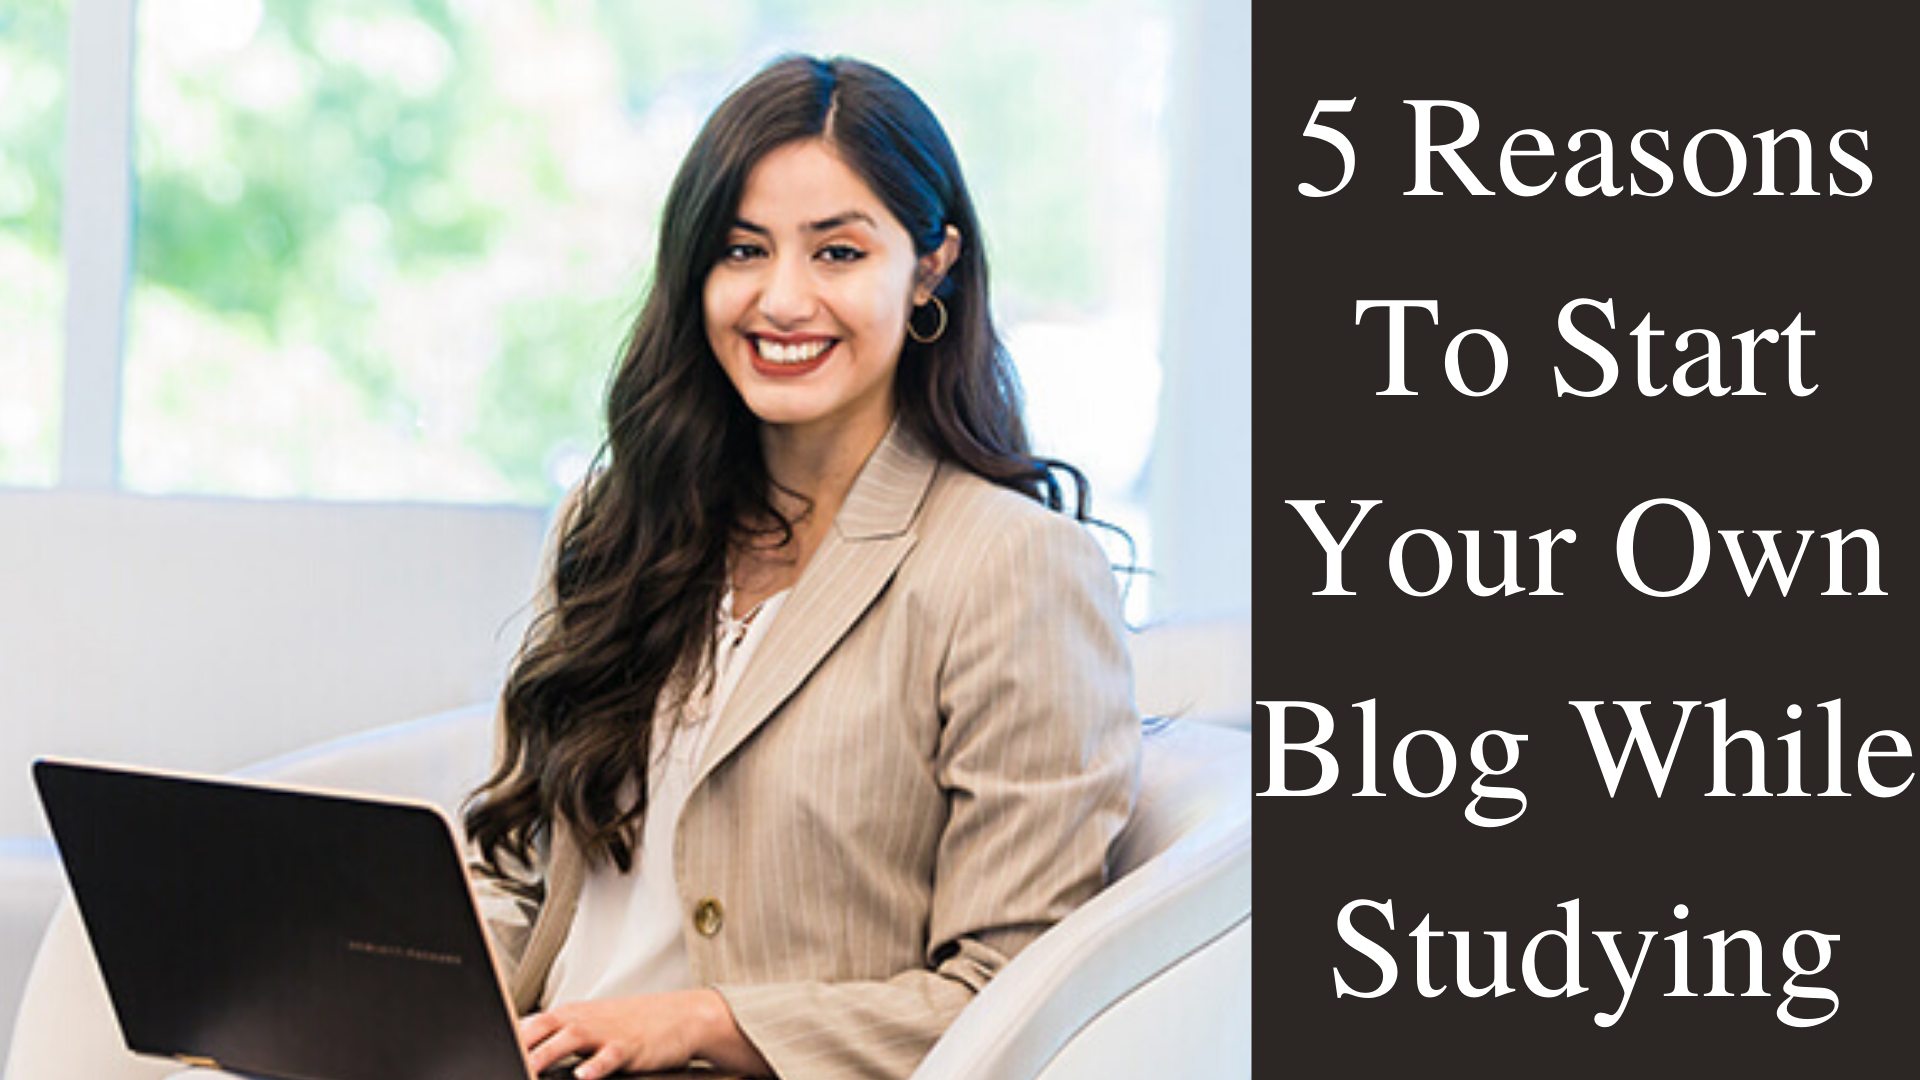 5-reasons-to-start-your-own-blog-while-studying-digital-marketing-course-in-vijayawada